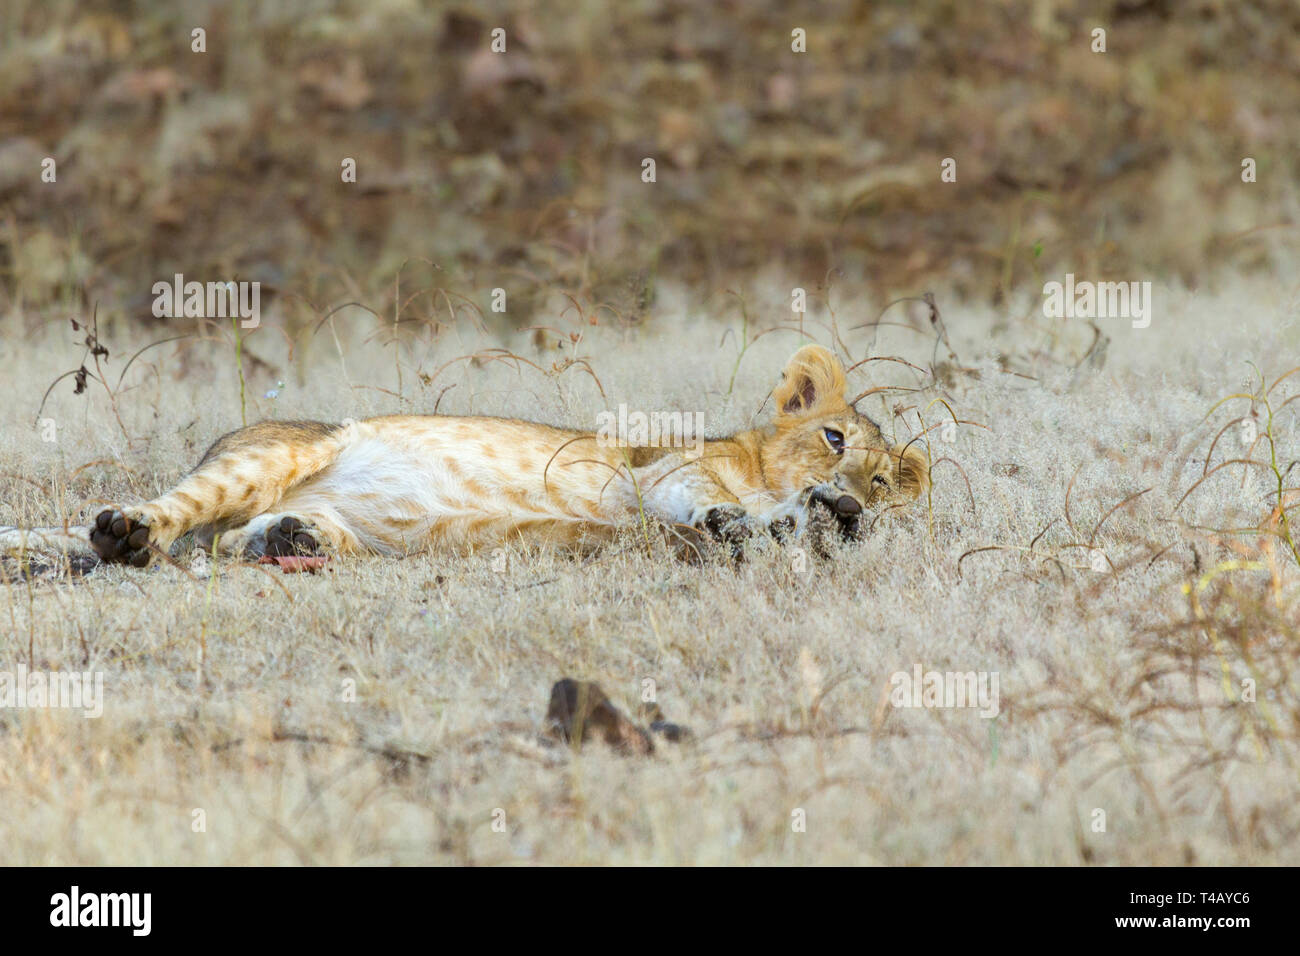 Asiatic Lion or Asian Lion or Panthera leo leo cub playing on the grassland at Gir National park Gujarat India Stock Photo